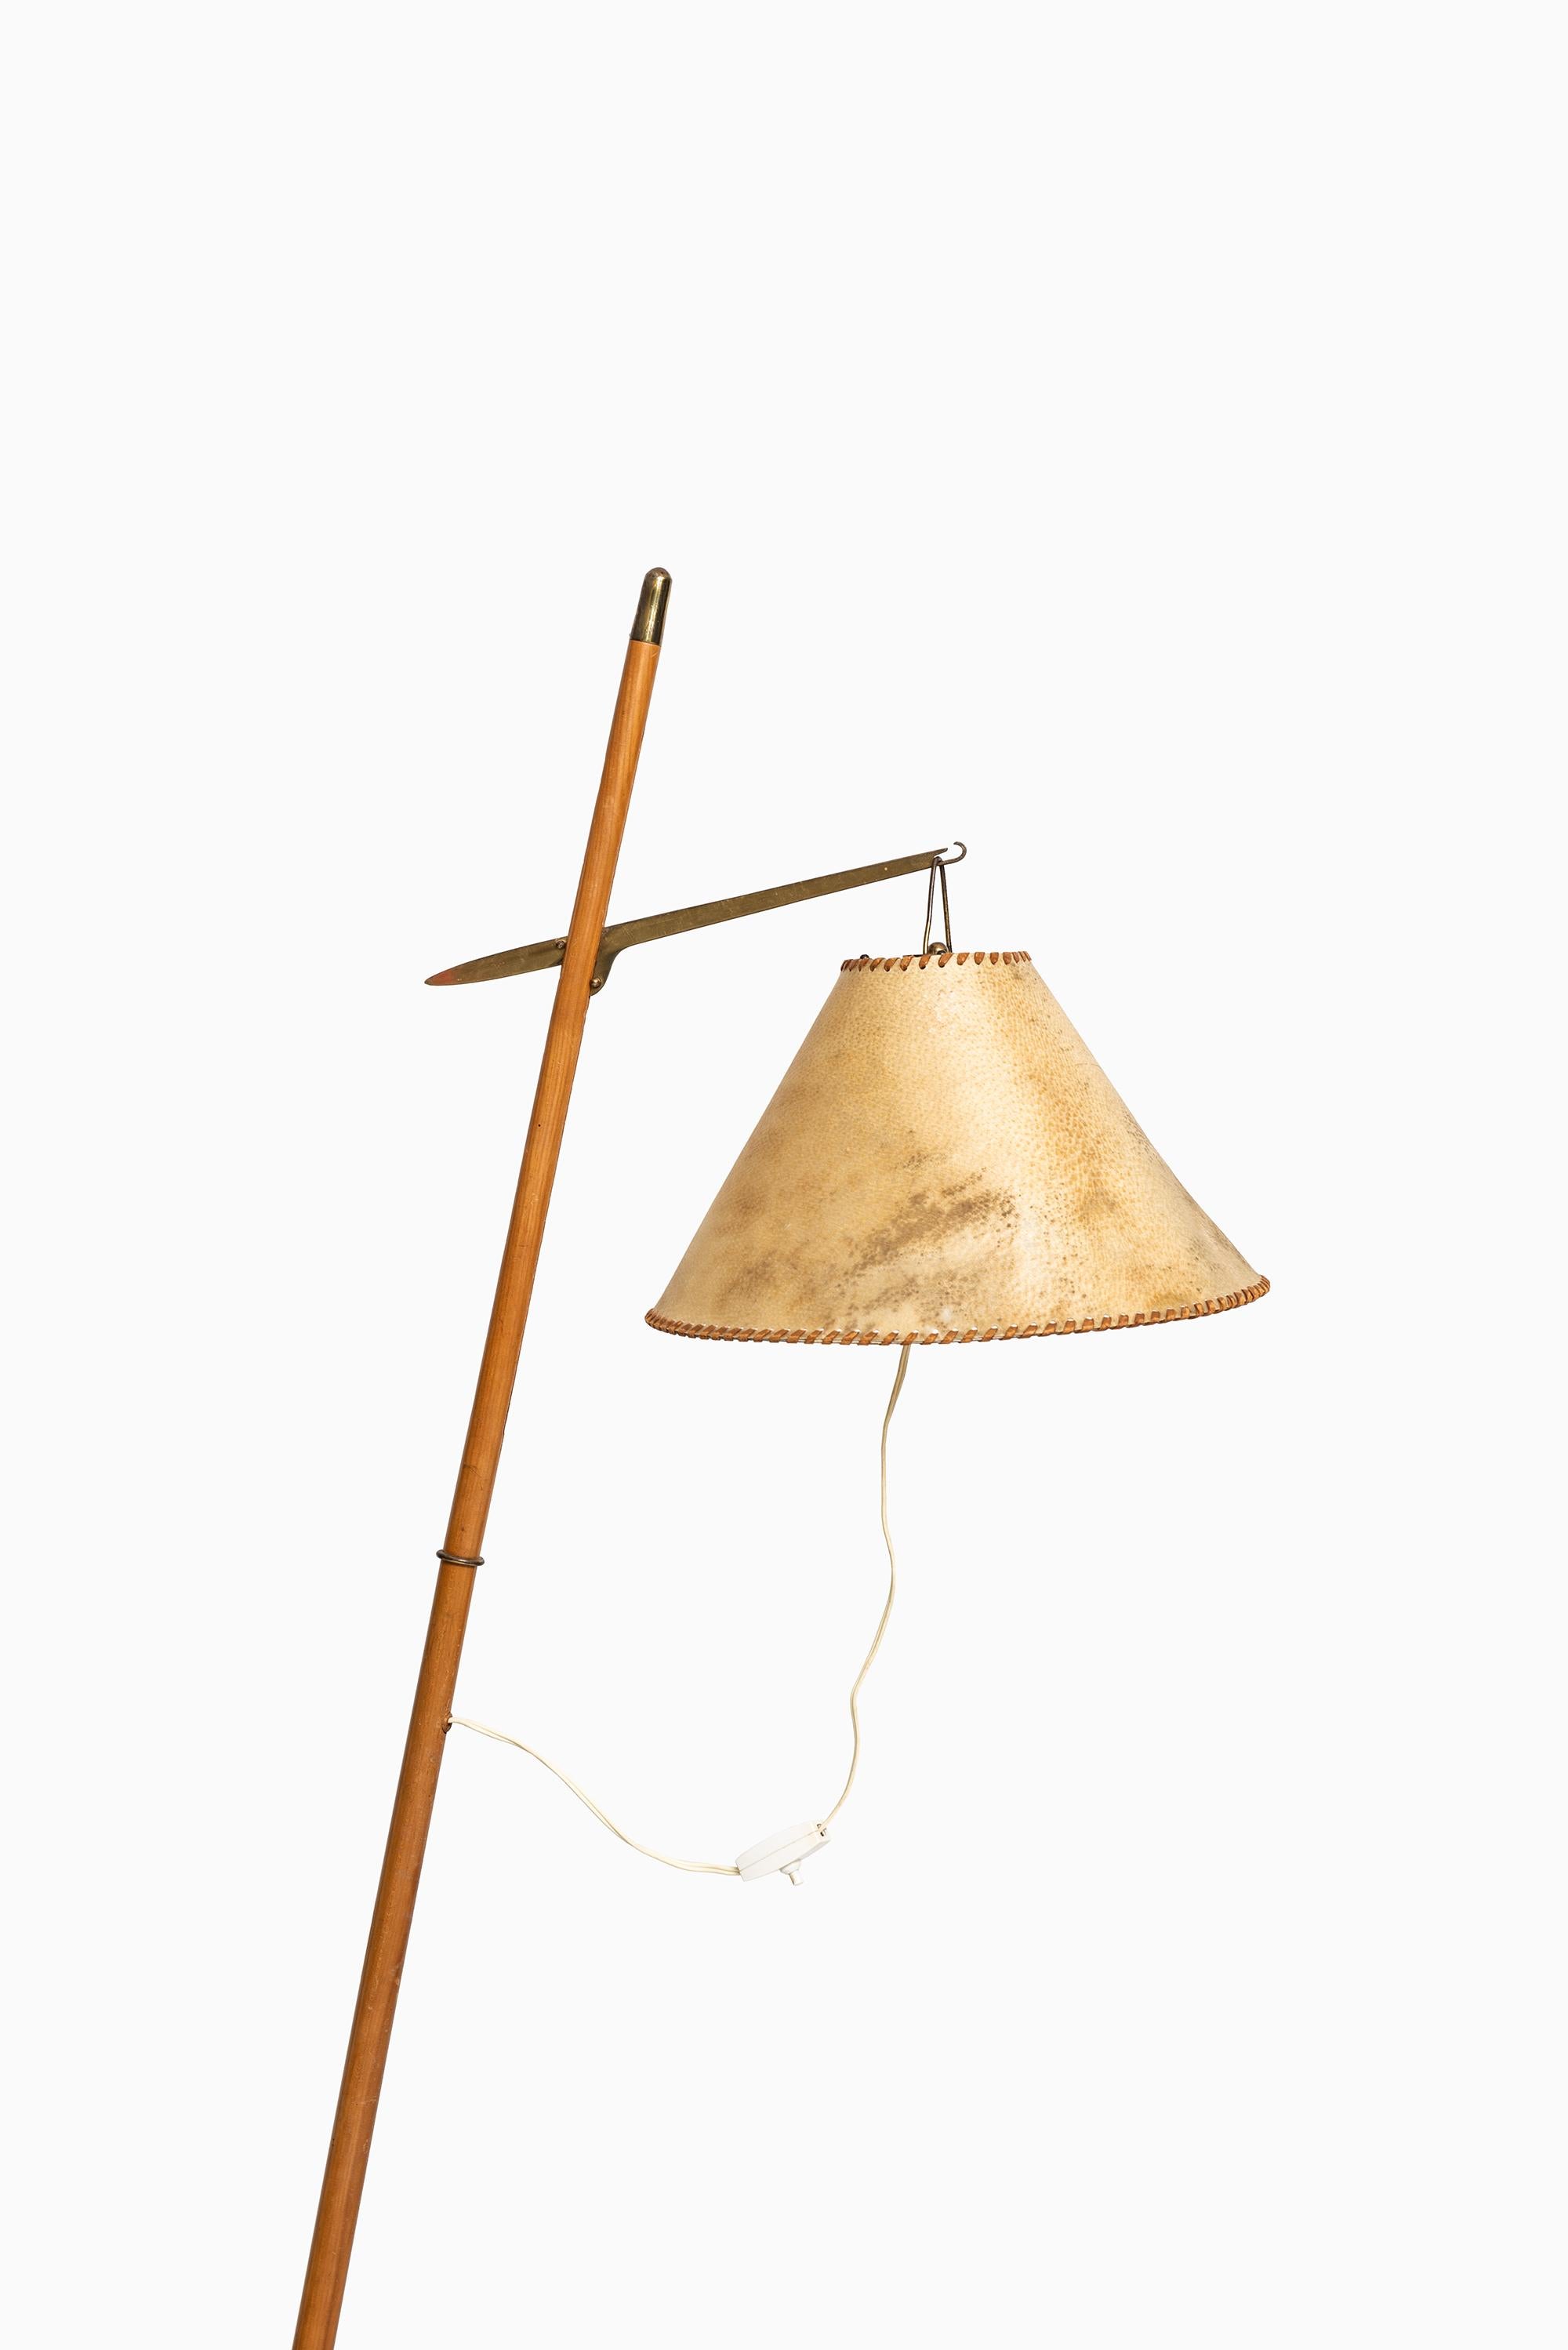 Very rare floor lamp attributed to J.T Kalmar. Probably produced by J.T Kalmar in Austria.